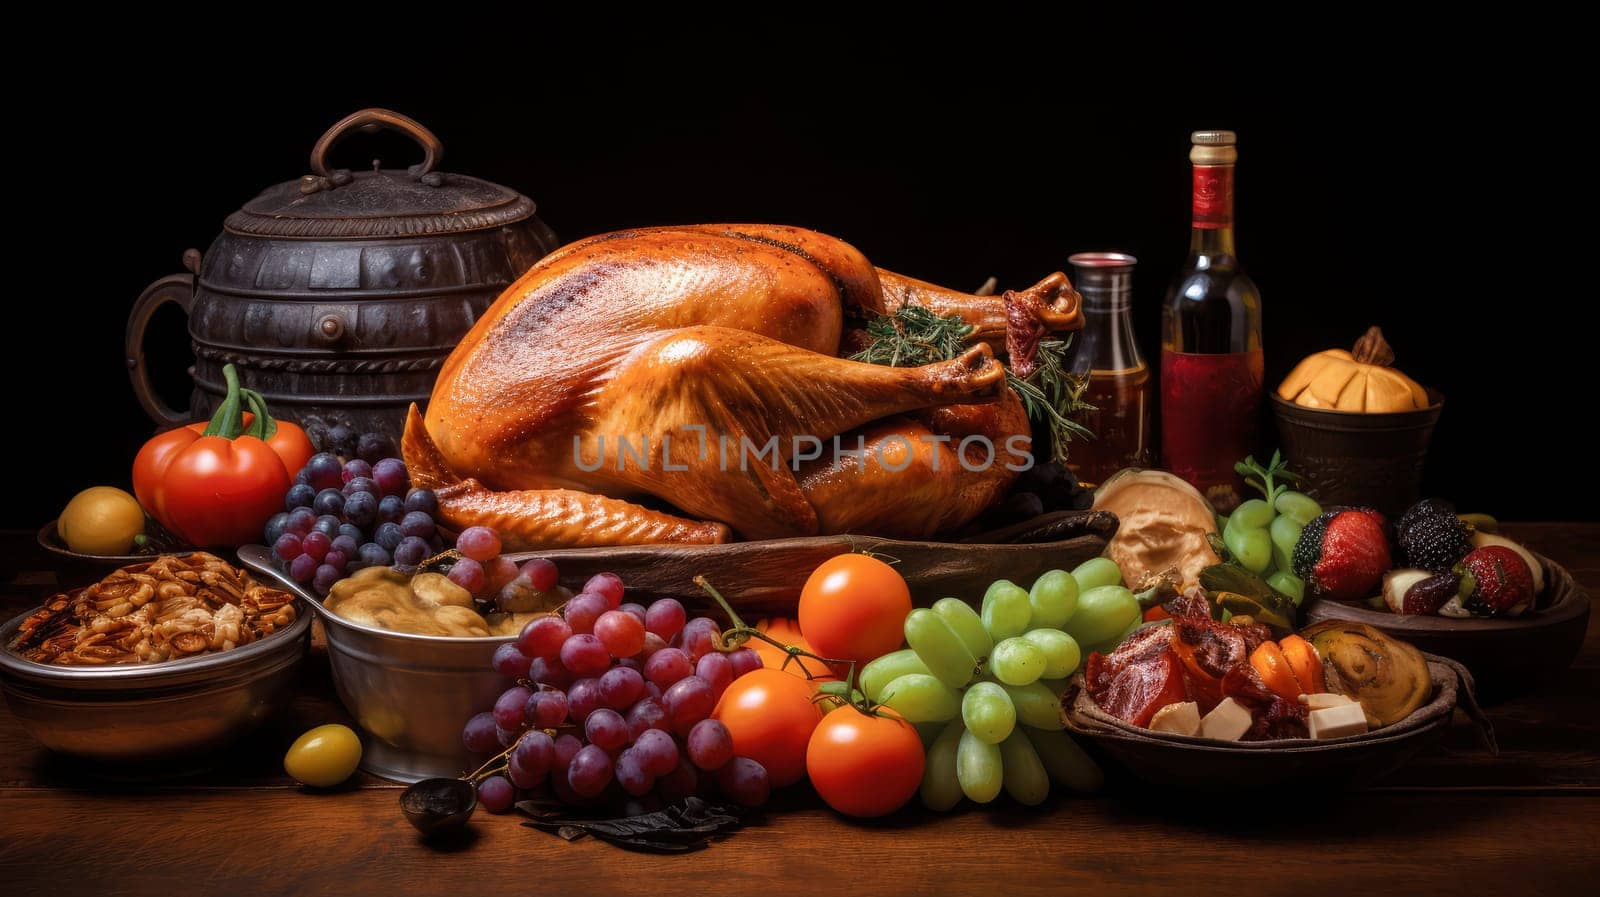 Baked turkey and other Thanksgiving foods. by palinchak